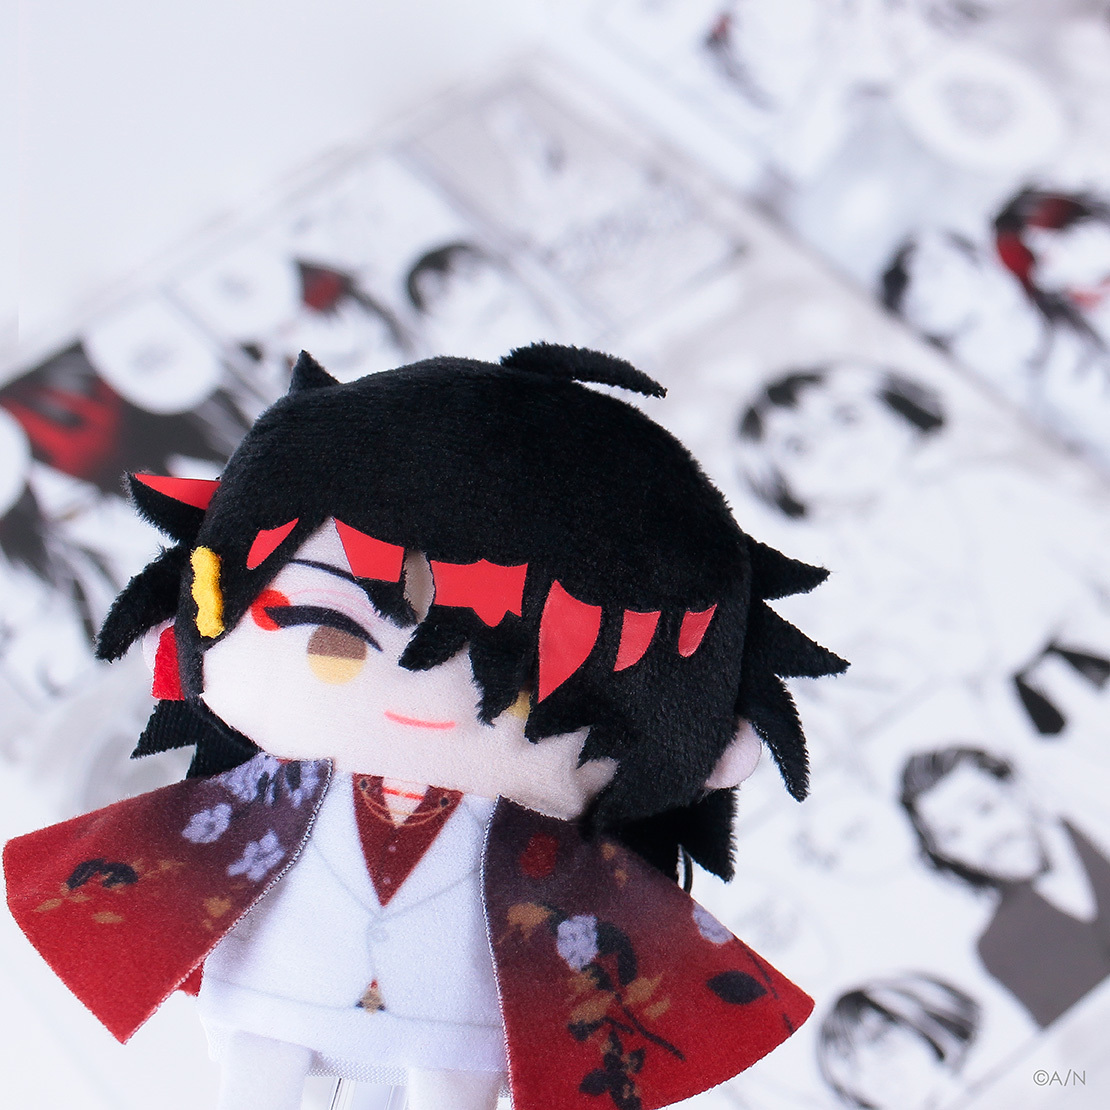 【Vox Akuma:The Demon Hungers limited-time order period campaign👹🧧】 If you purchase merch during the order period, you could be one of 3 lucky winners to get... A Movie Poster SIGNED BY @Vox_Akuma himself! Order period ends May 19 (Sun) 7:59 PDT Don't miss out🏃 (cont.)